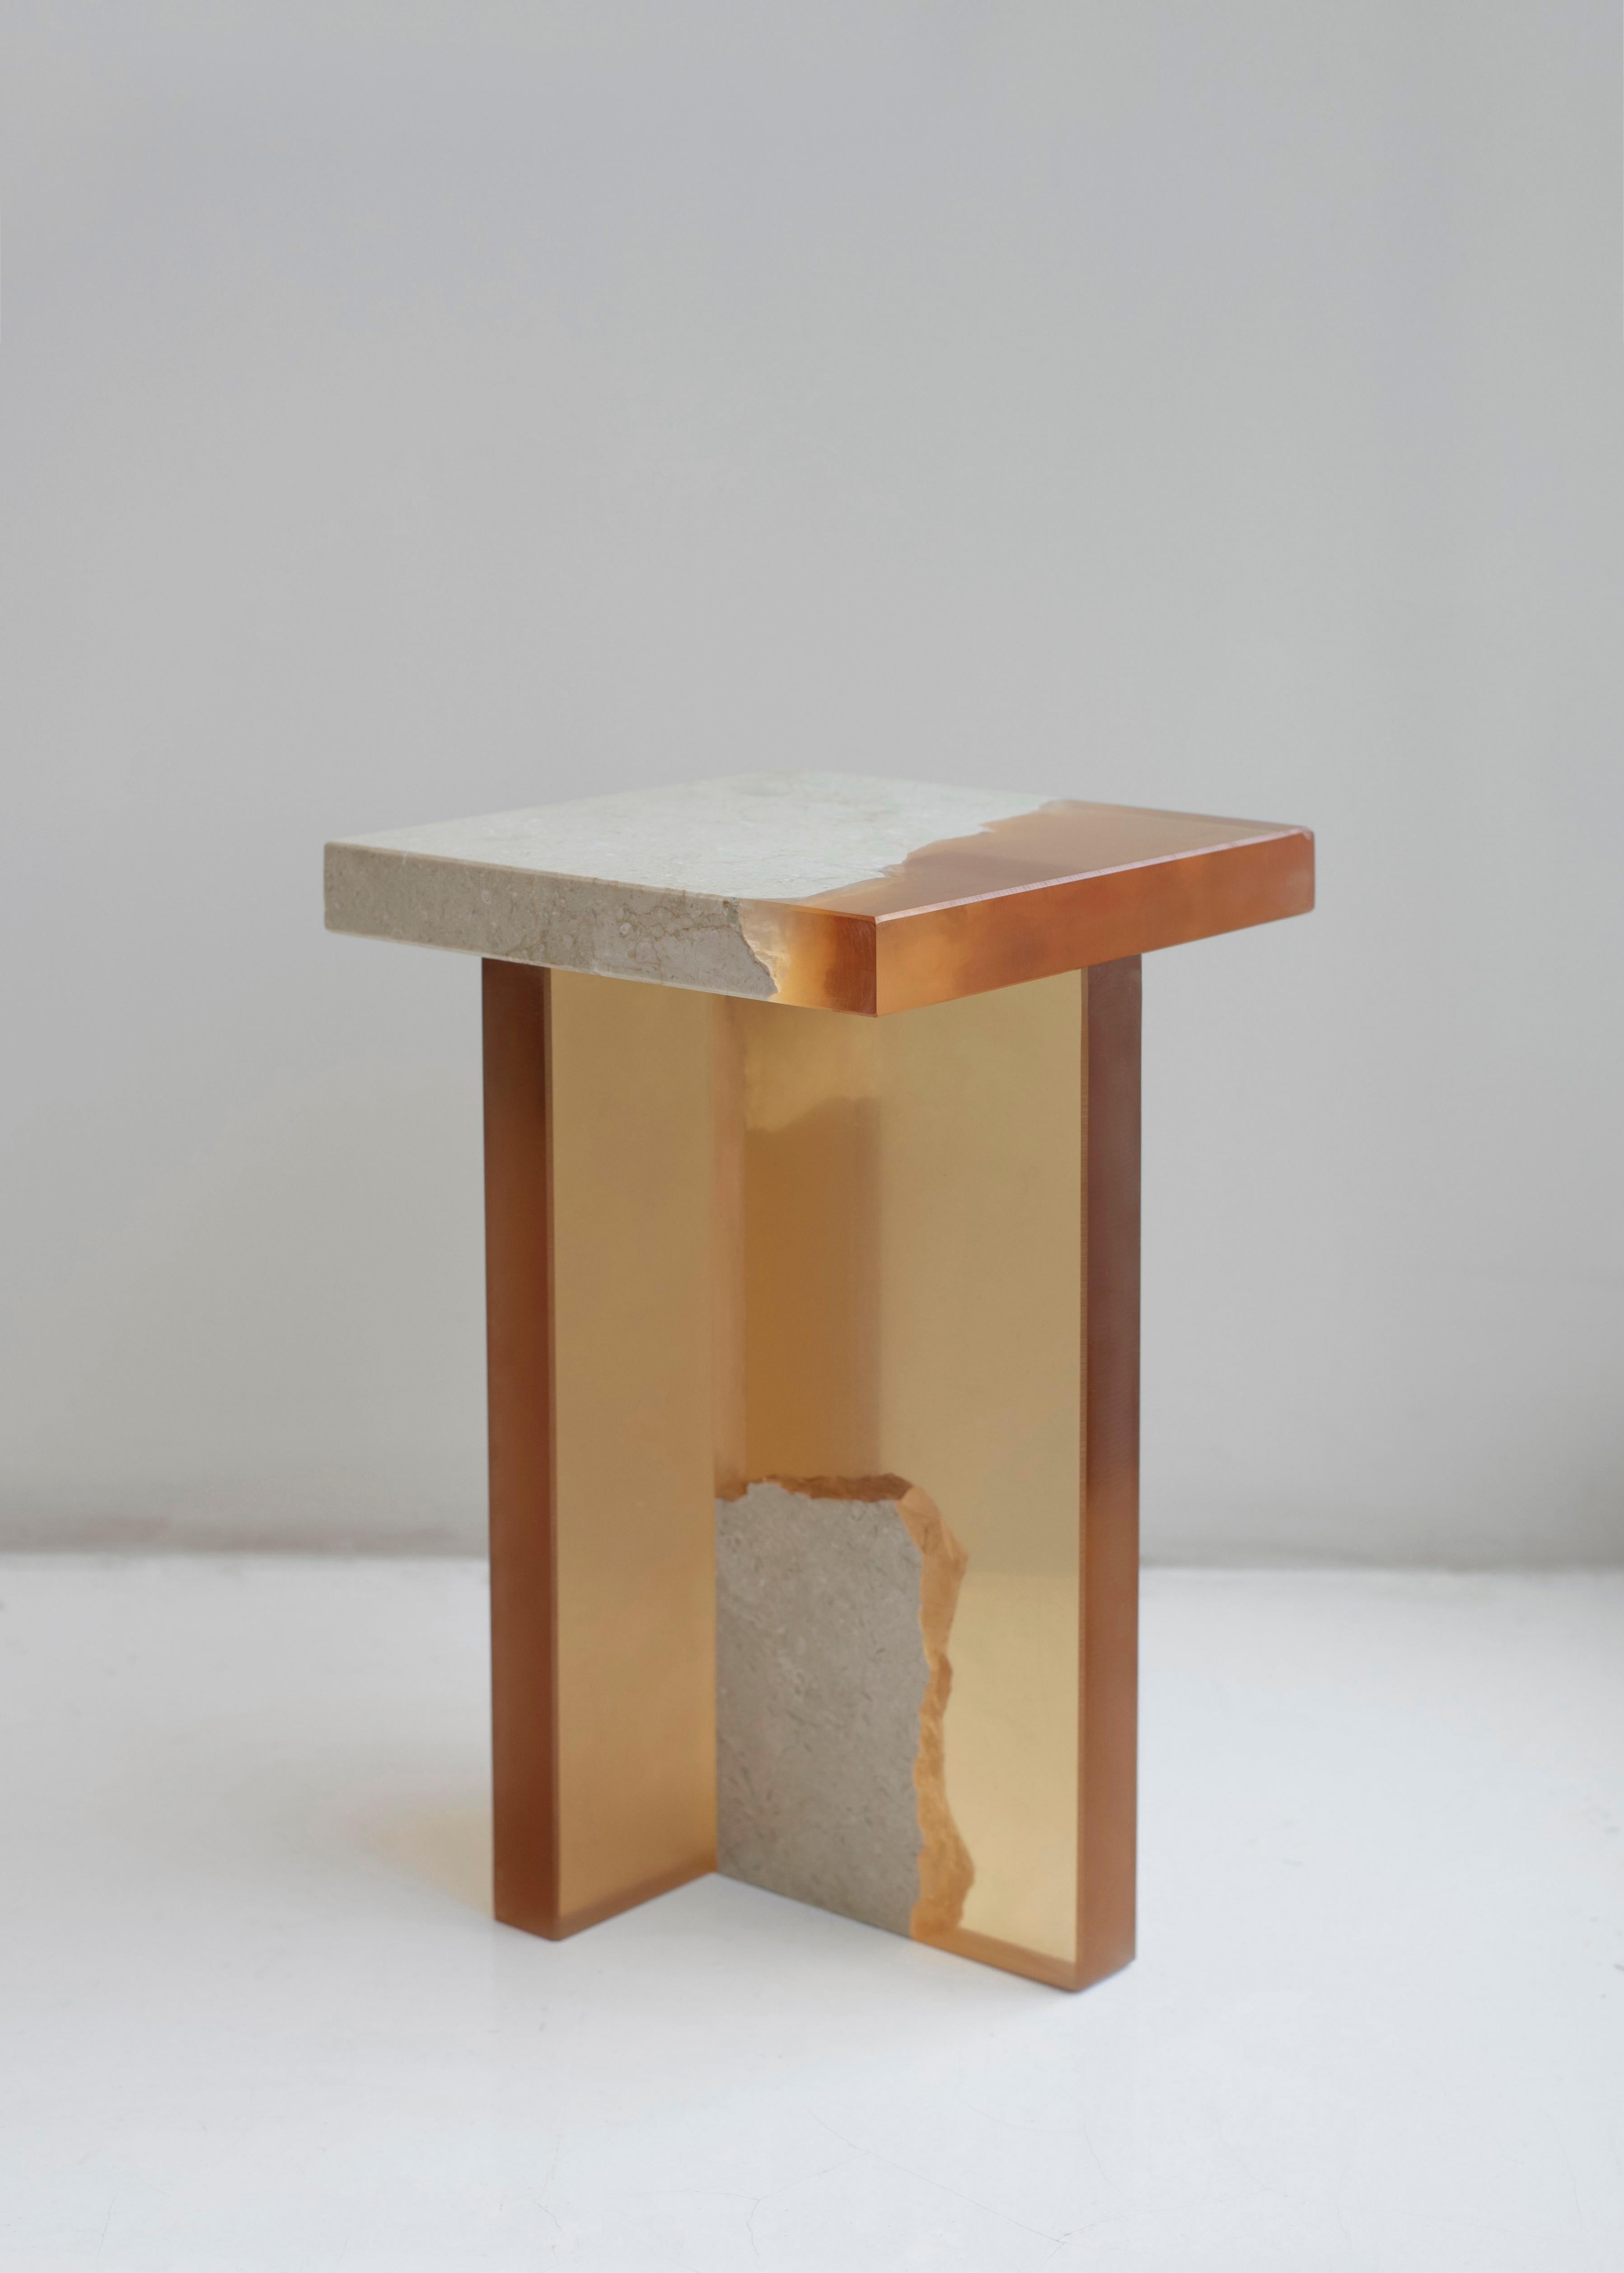 Crystal resin and marble - fragment side table - Jang Hea Kyoung
Artist: Jang Hea Kyoung
Materials: Crystal resin and marble
Dimensions: 28 x 28 x 46 cm
Can also be used a stool

Jang Hea Kyoung is based in Seoul, Republic of Korea. She